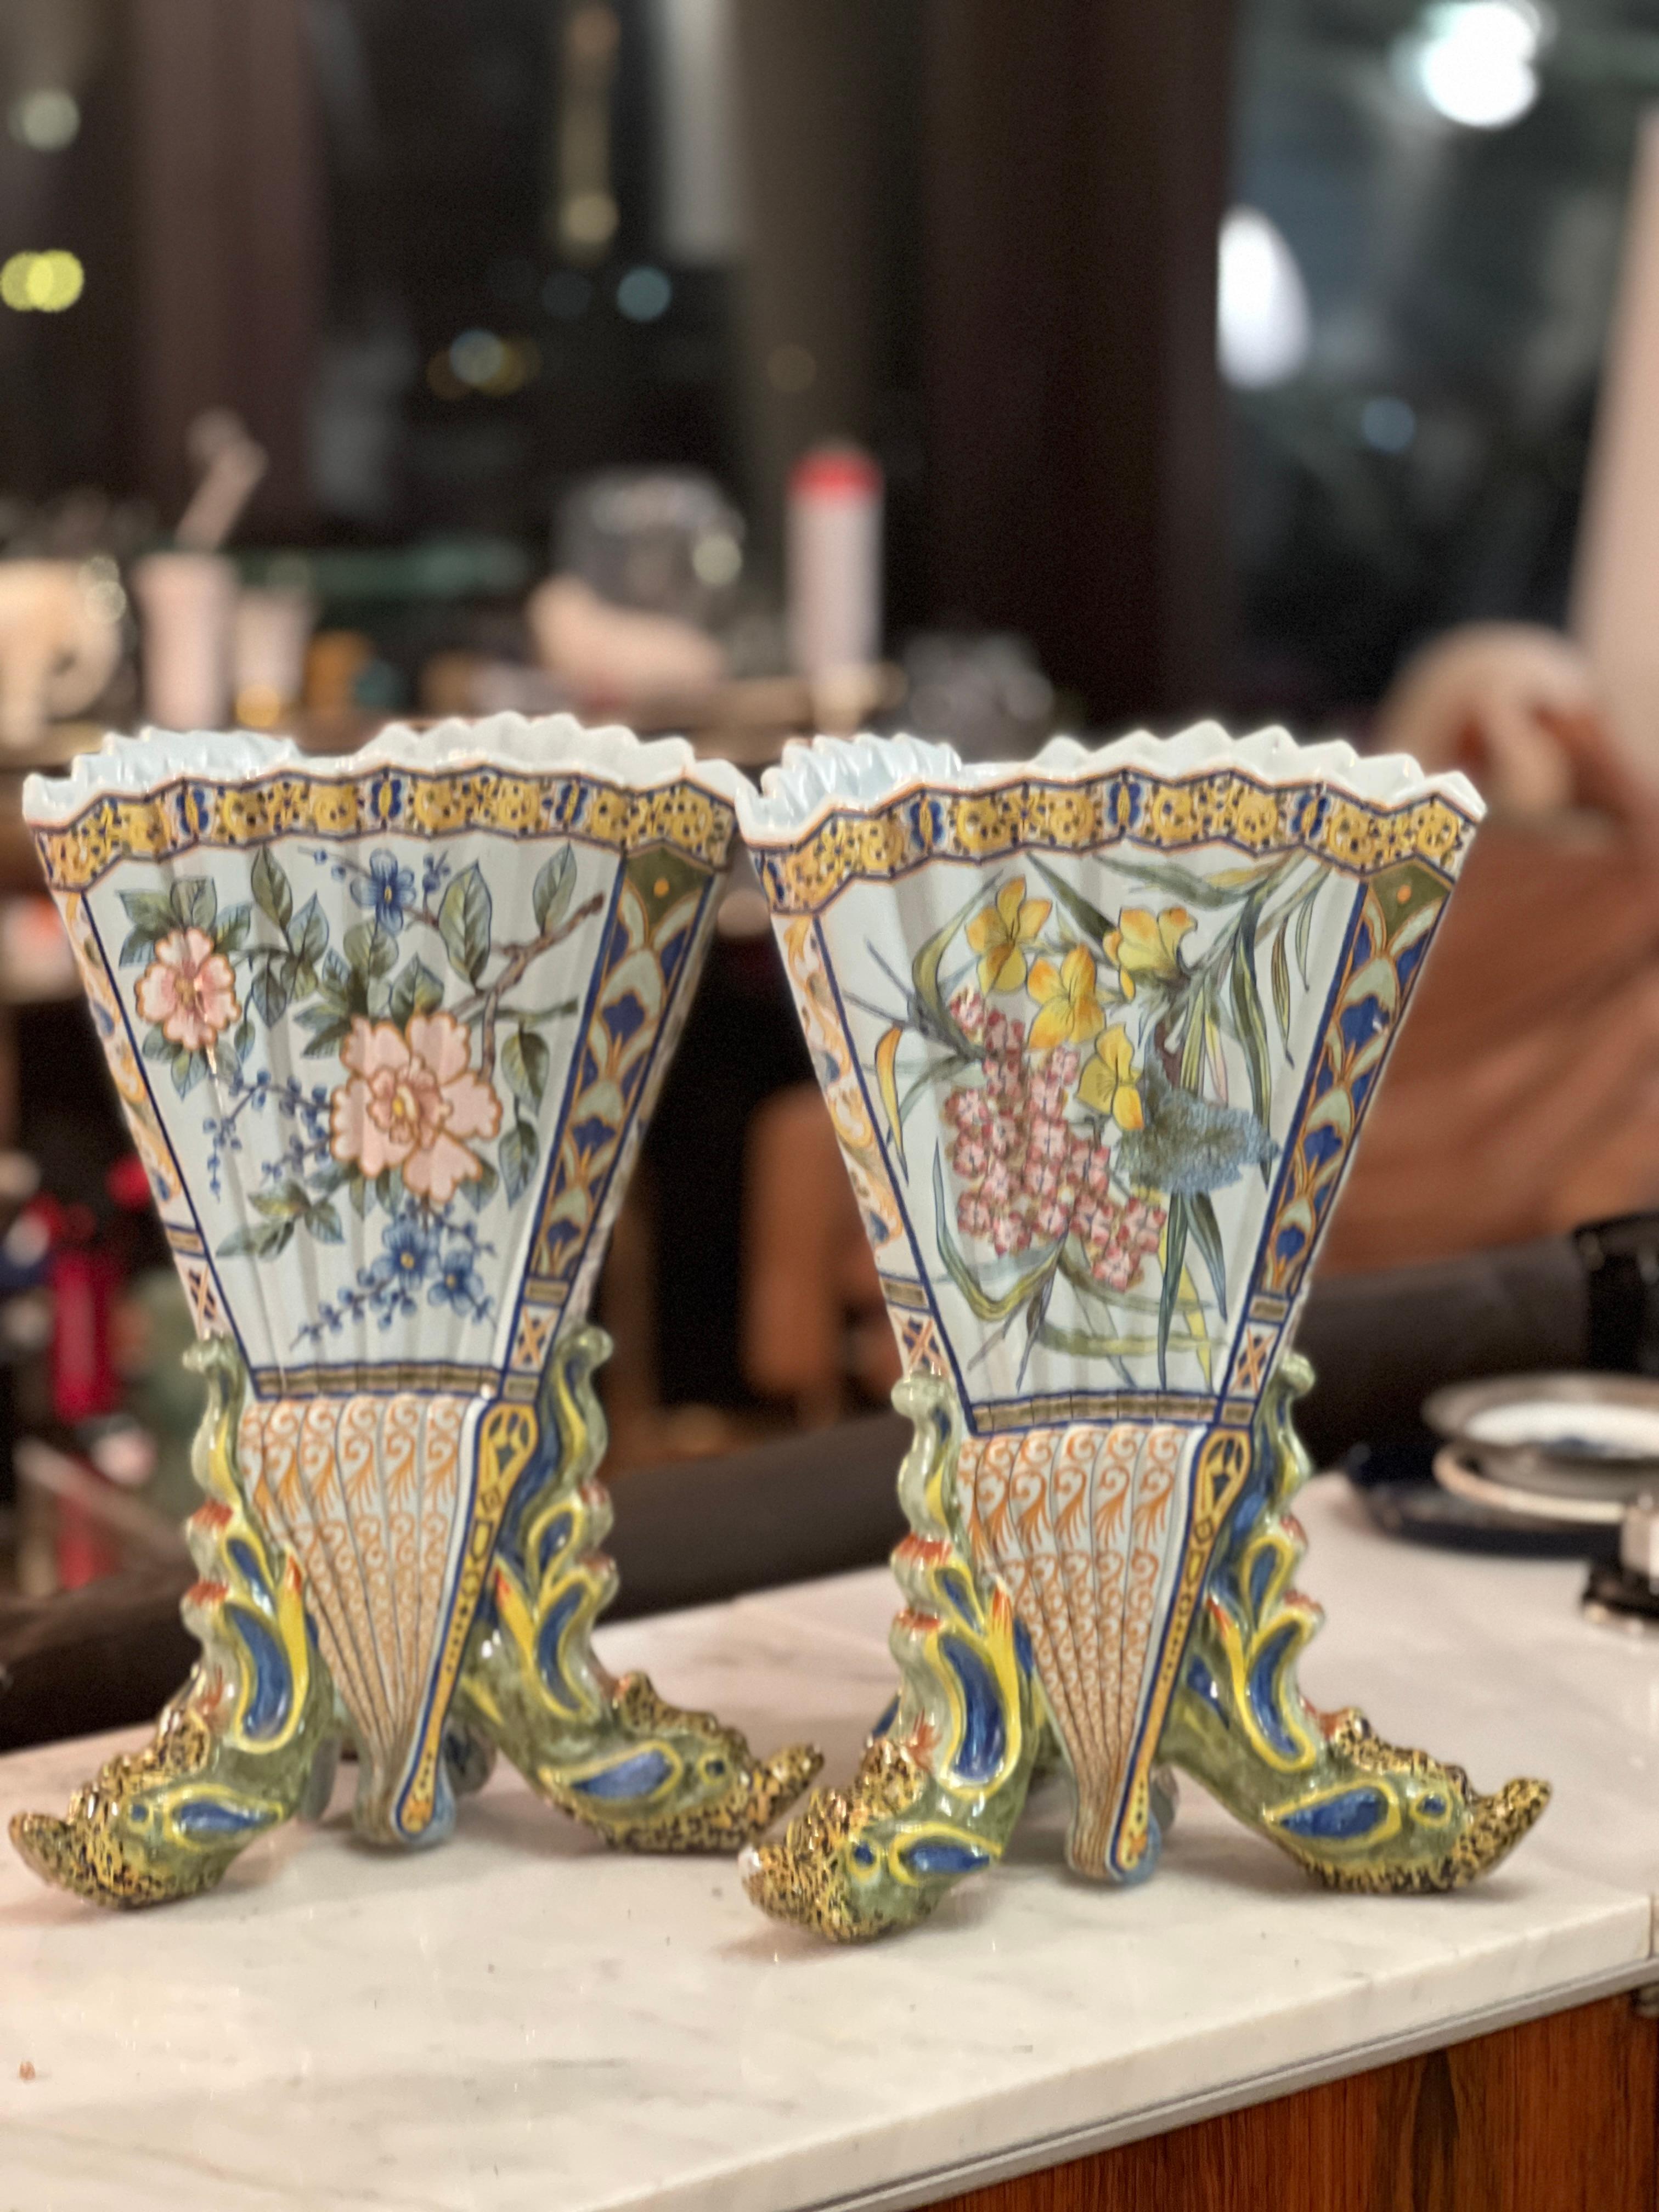 Stunning pair of large antique vessel. Created in Brittany, France in the late 19th century. The colourful hand painted ceramic vase stands on three head shaped feet, over a triangular and tapered form with scalloped rim and accordion shaped panels.